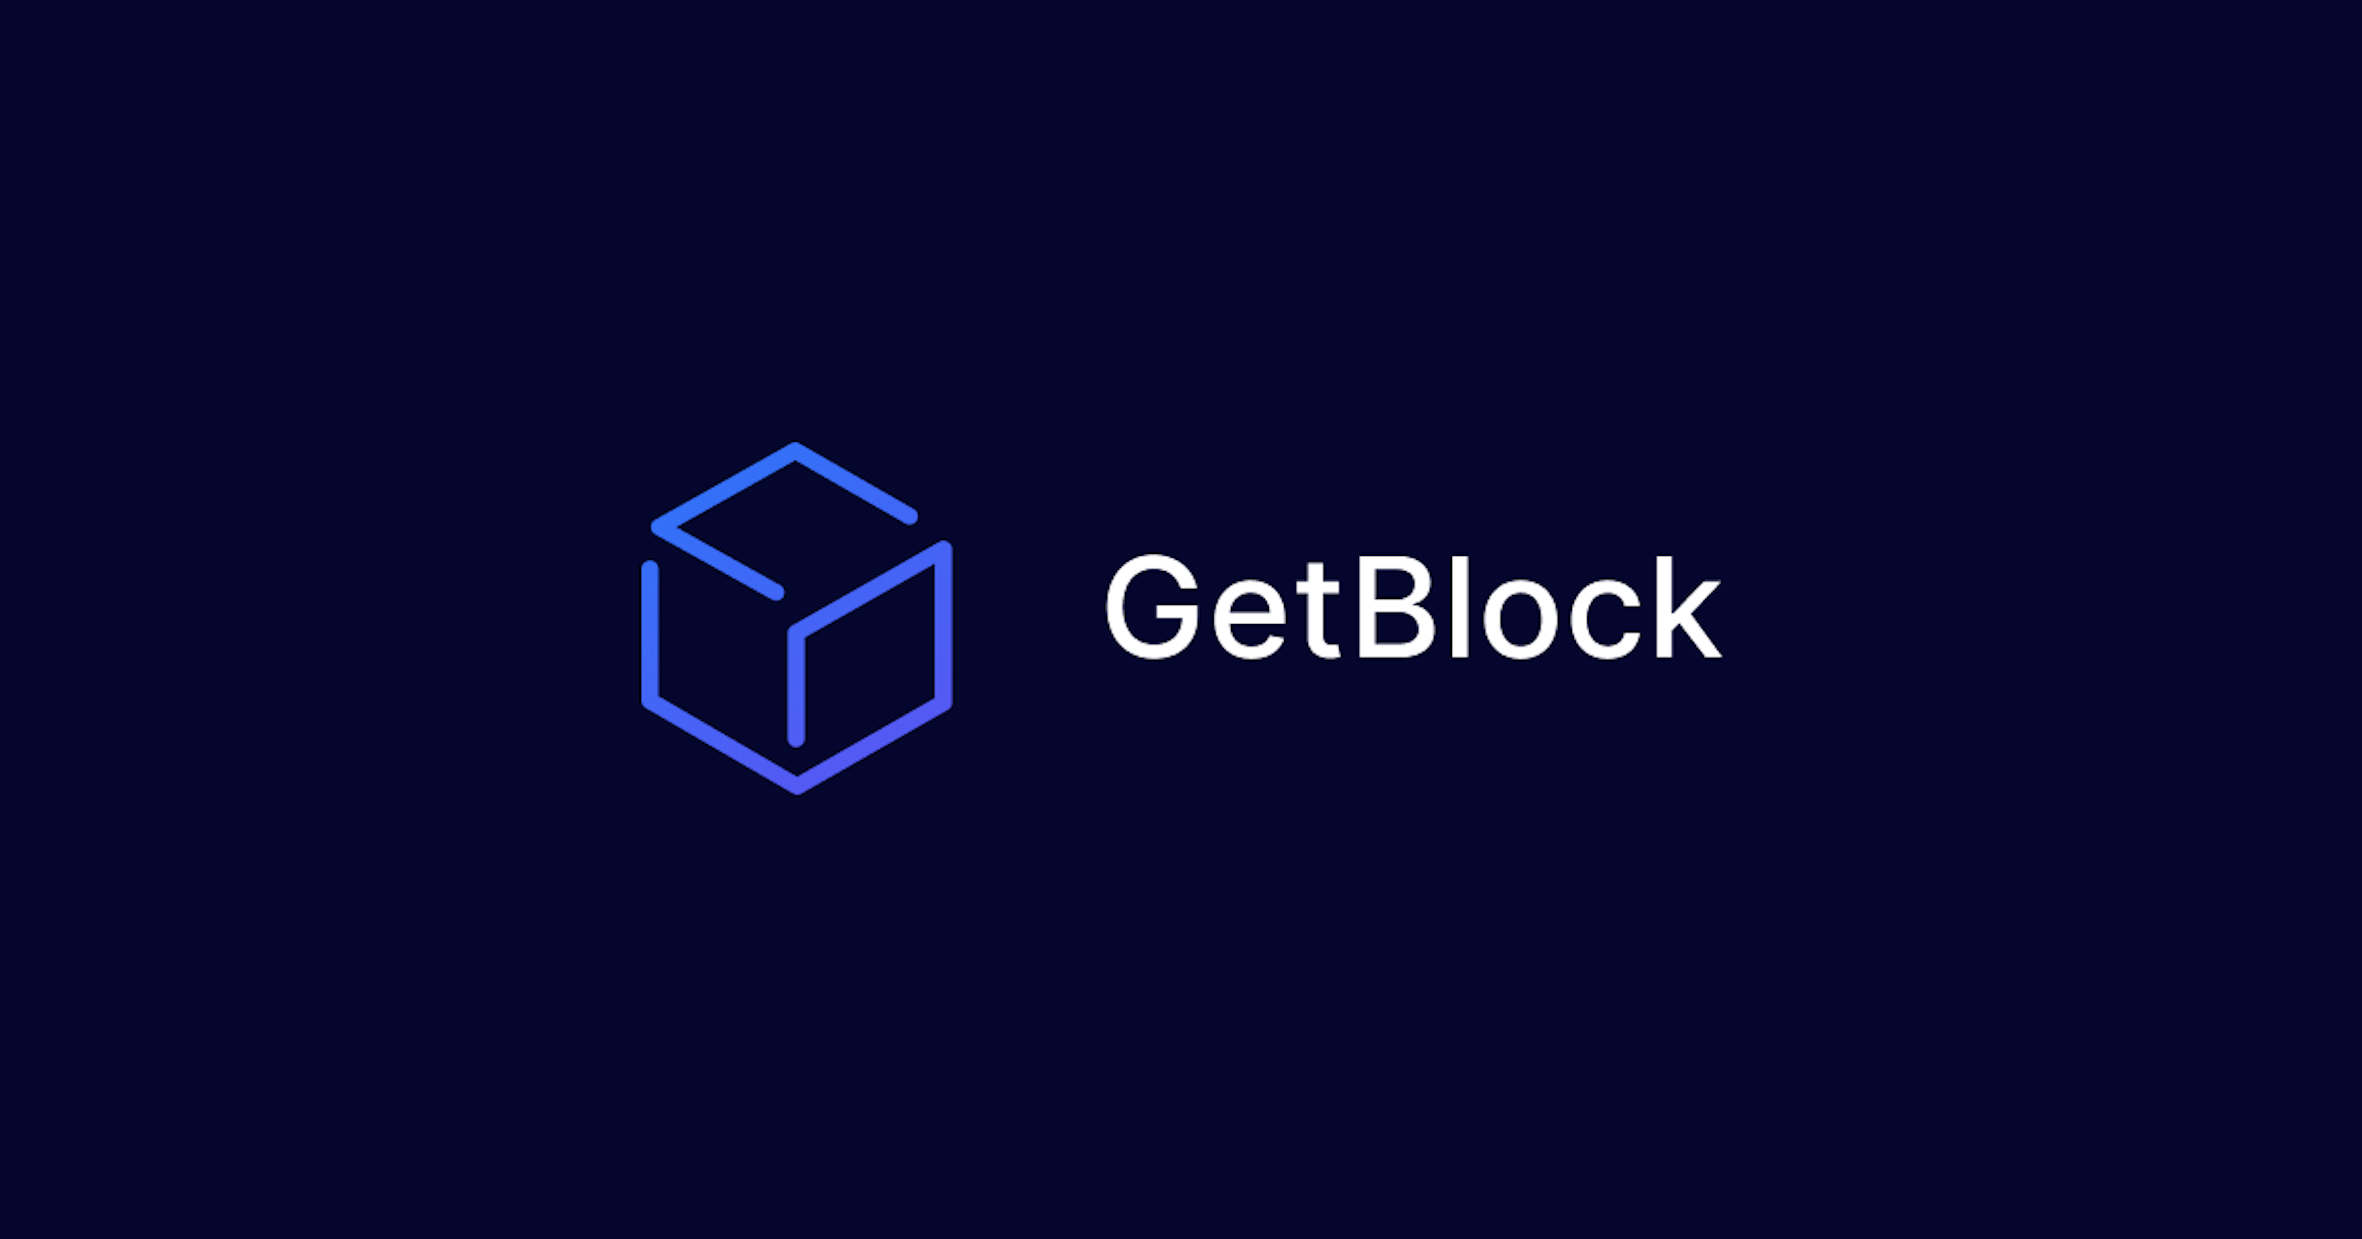 GetBlock.io Launches a Service That Provides Fast and Secure Access to Blockchain Nodes